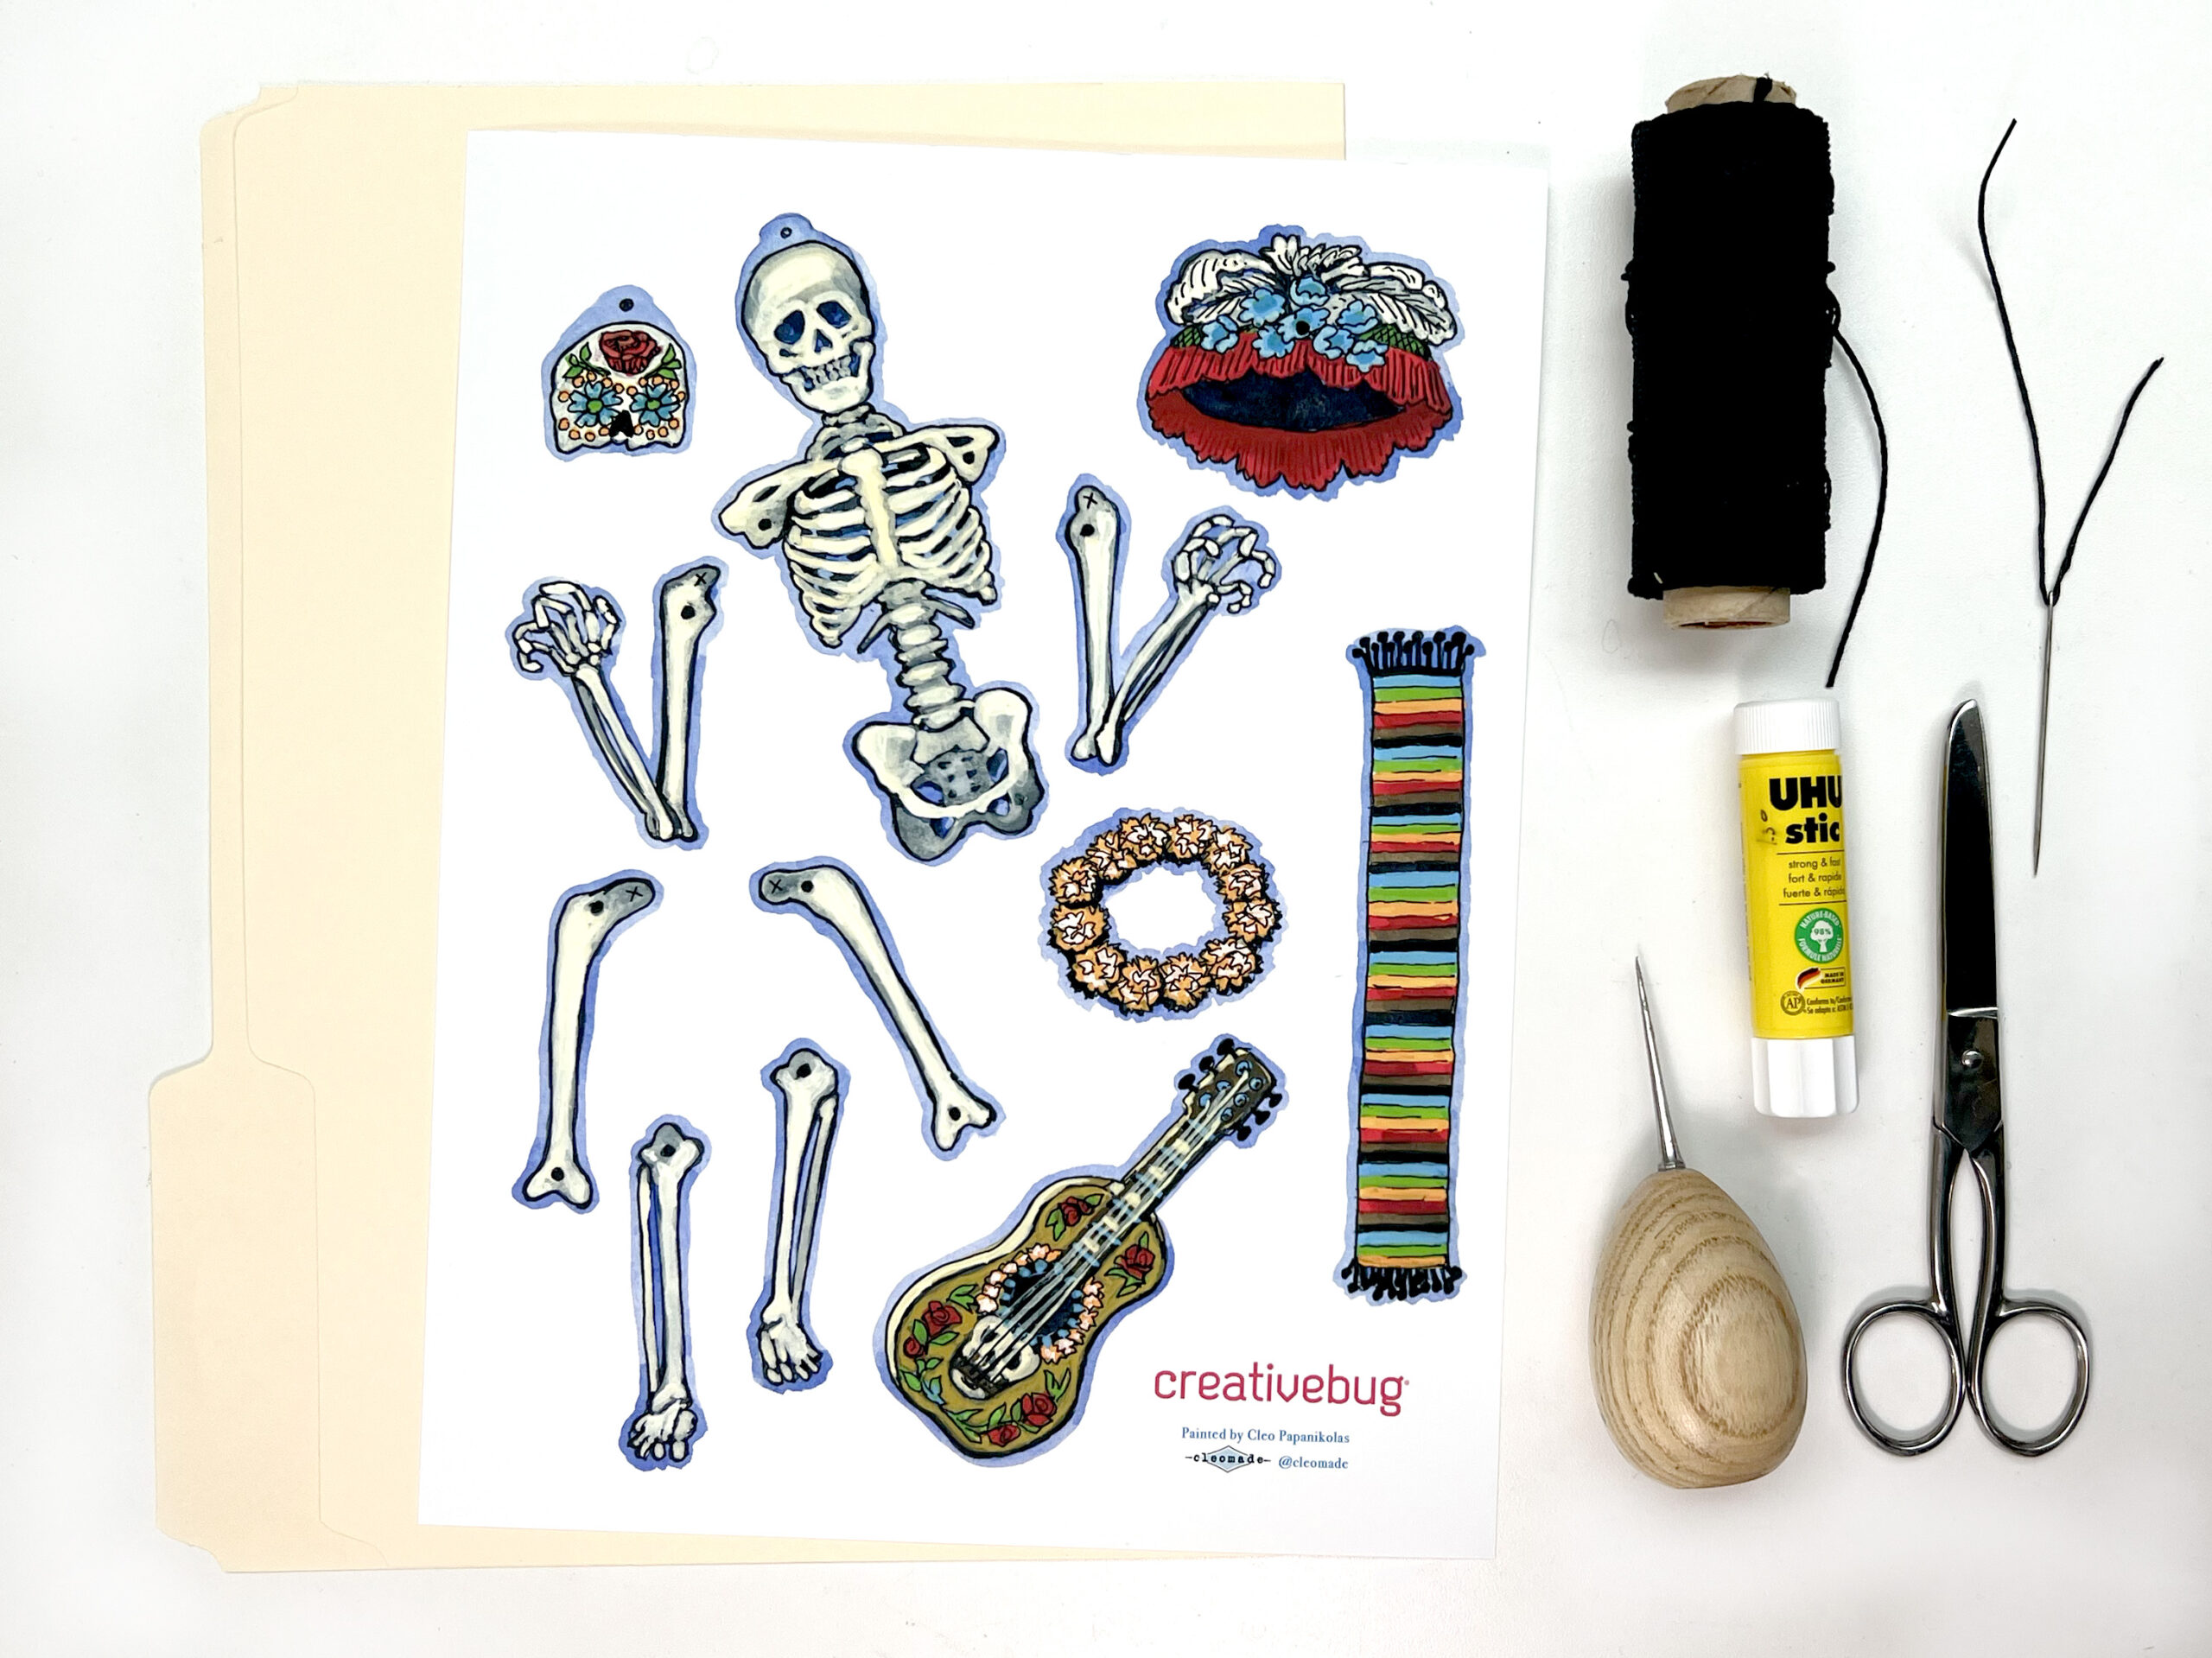 image of materials needed to make a paper skelton including a paper template, twine, scissors, glue stick, and awl